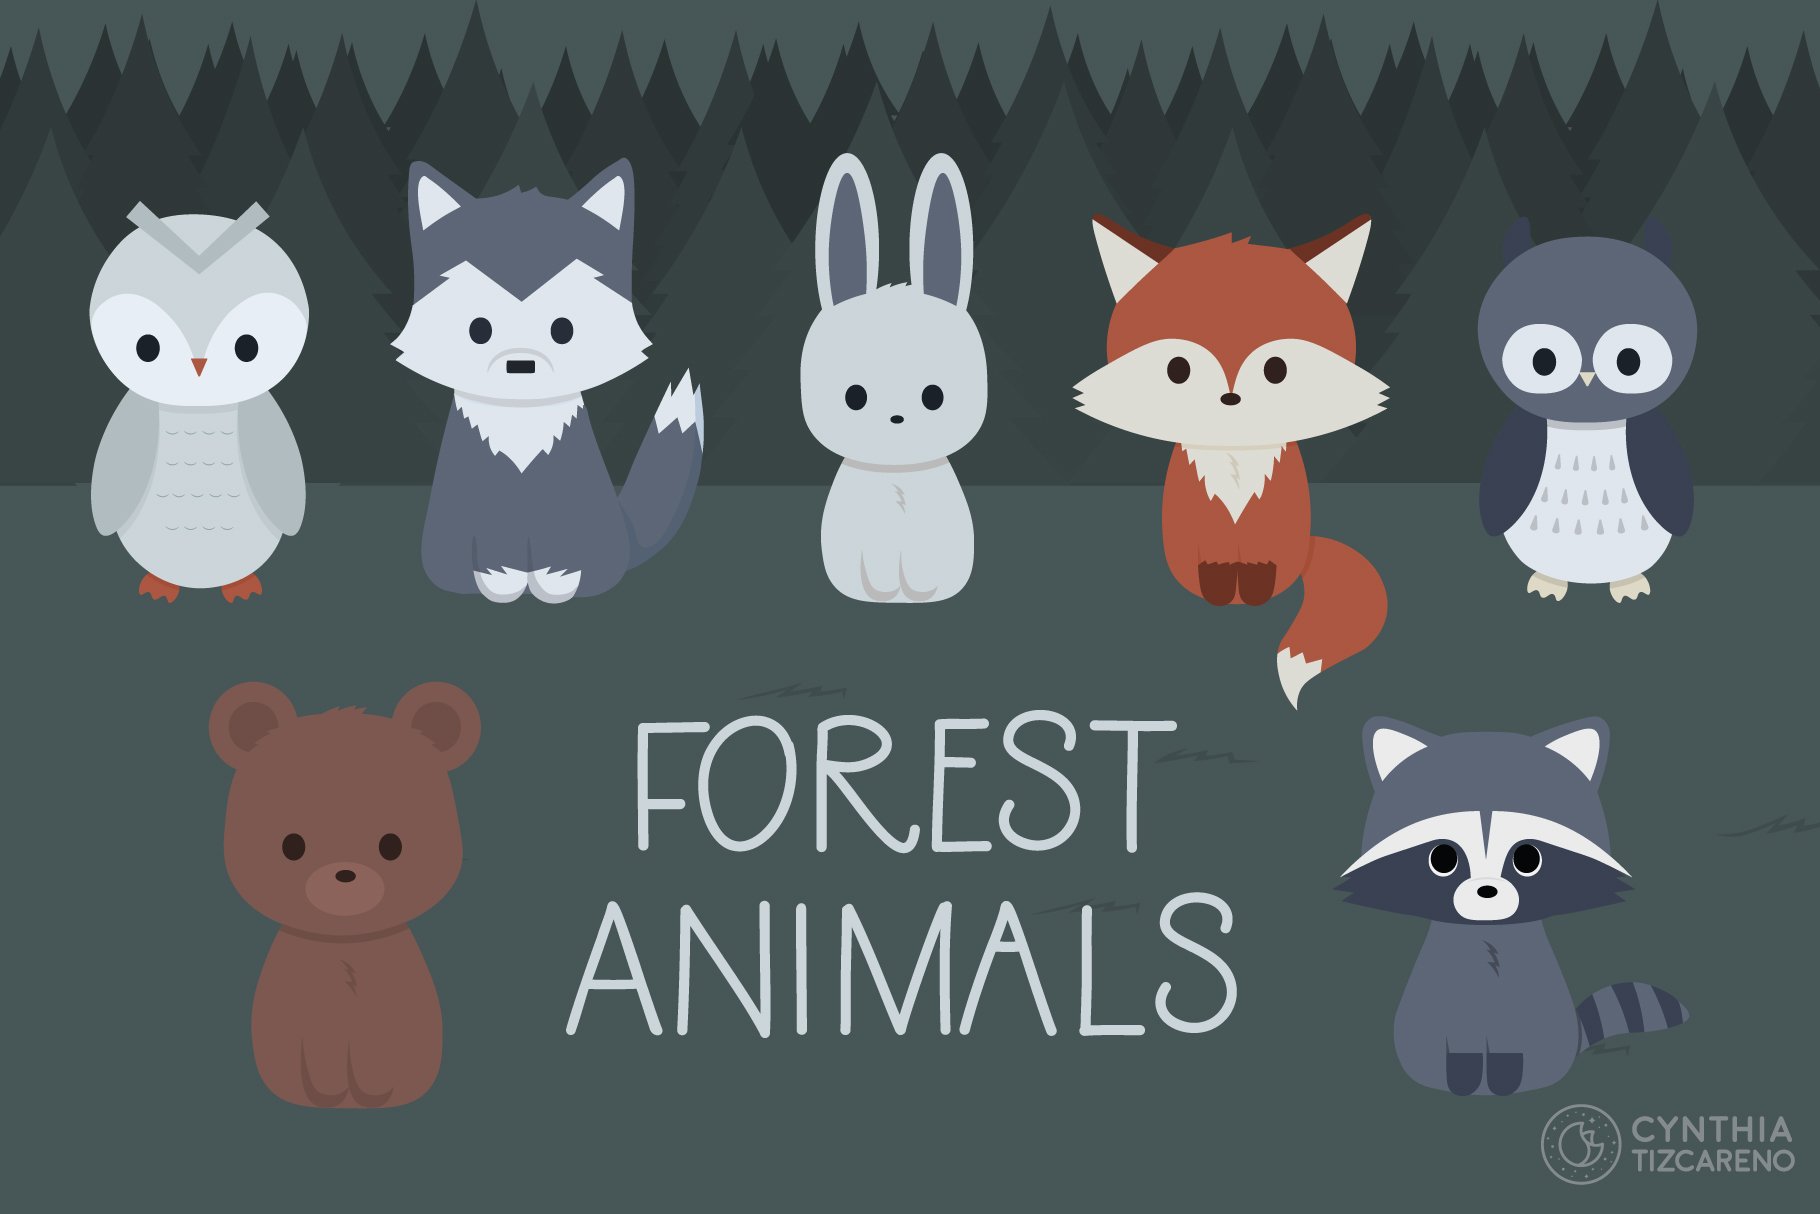 Forest Animals cover image.